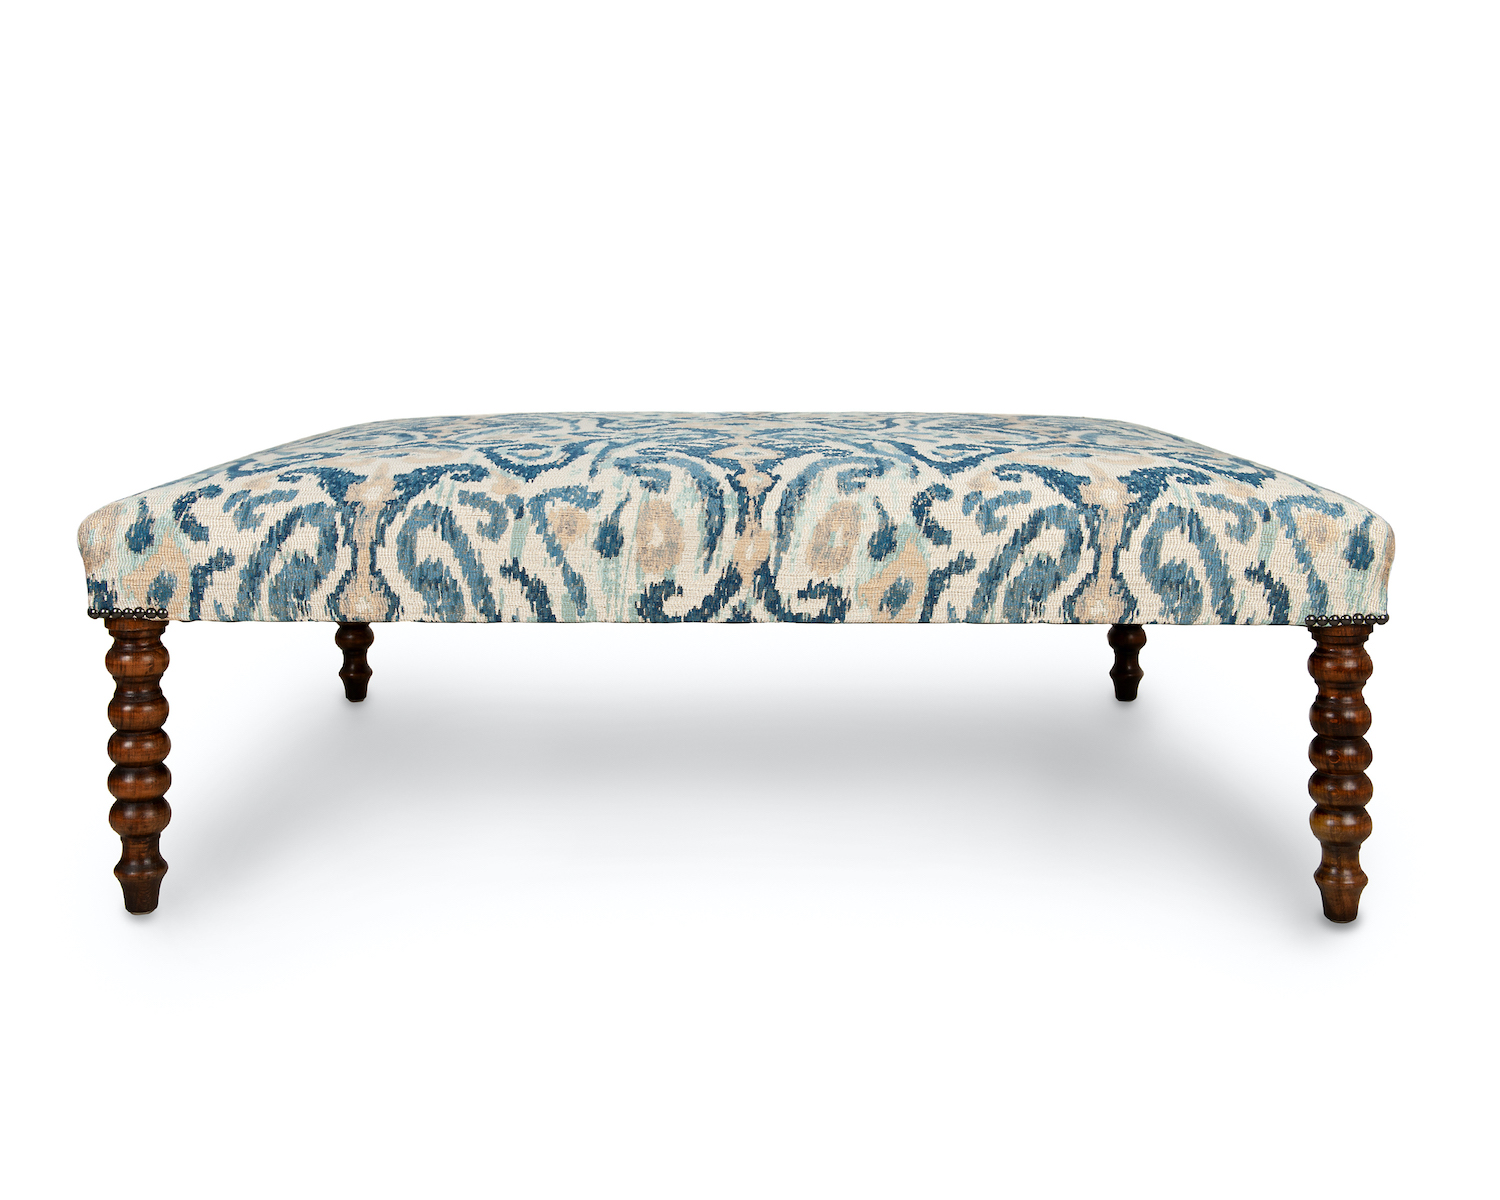 Shallow Border Footstool with Antique Stud Detailing and Slender Bobbin Legs